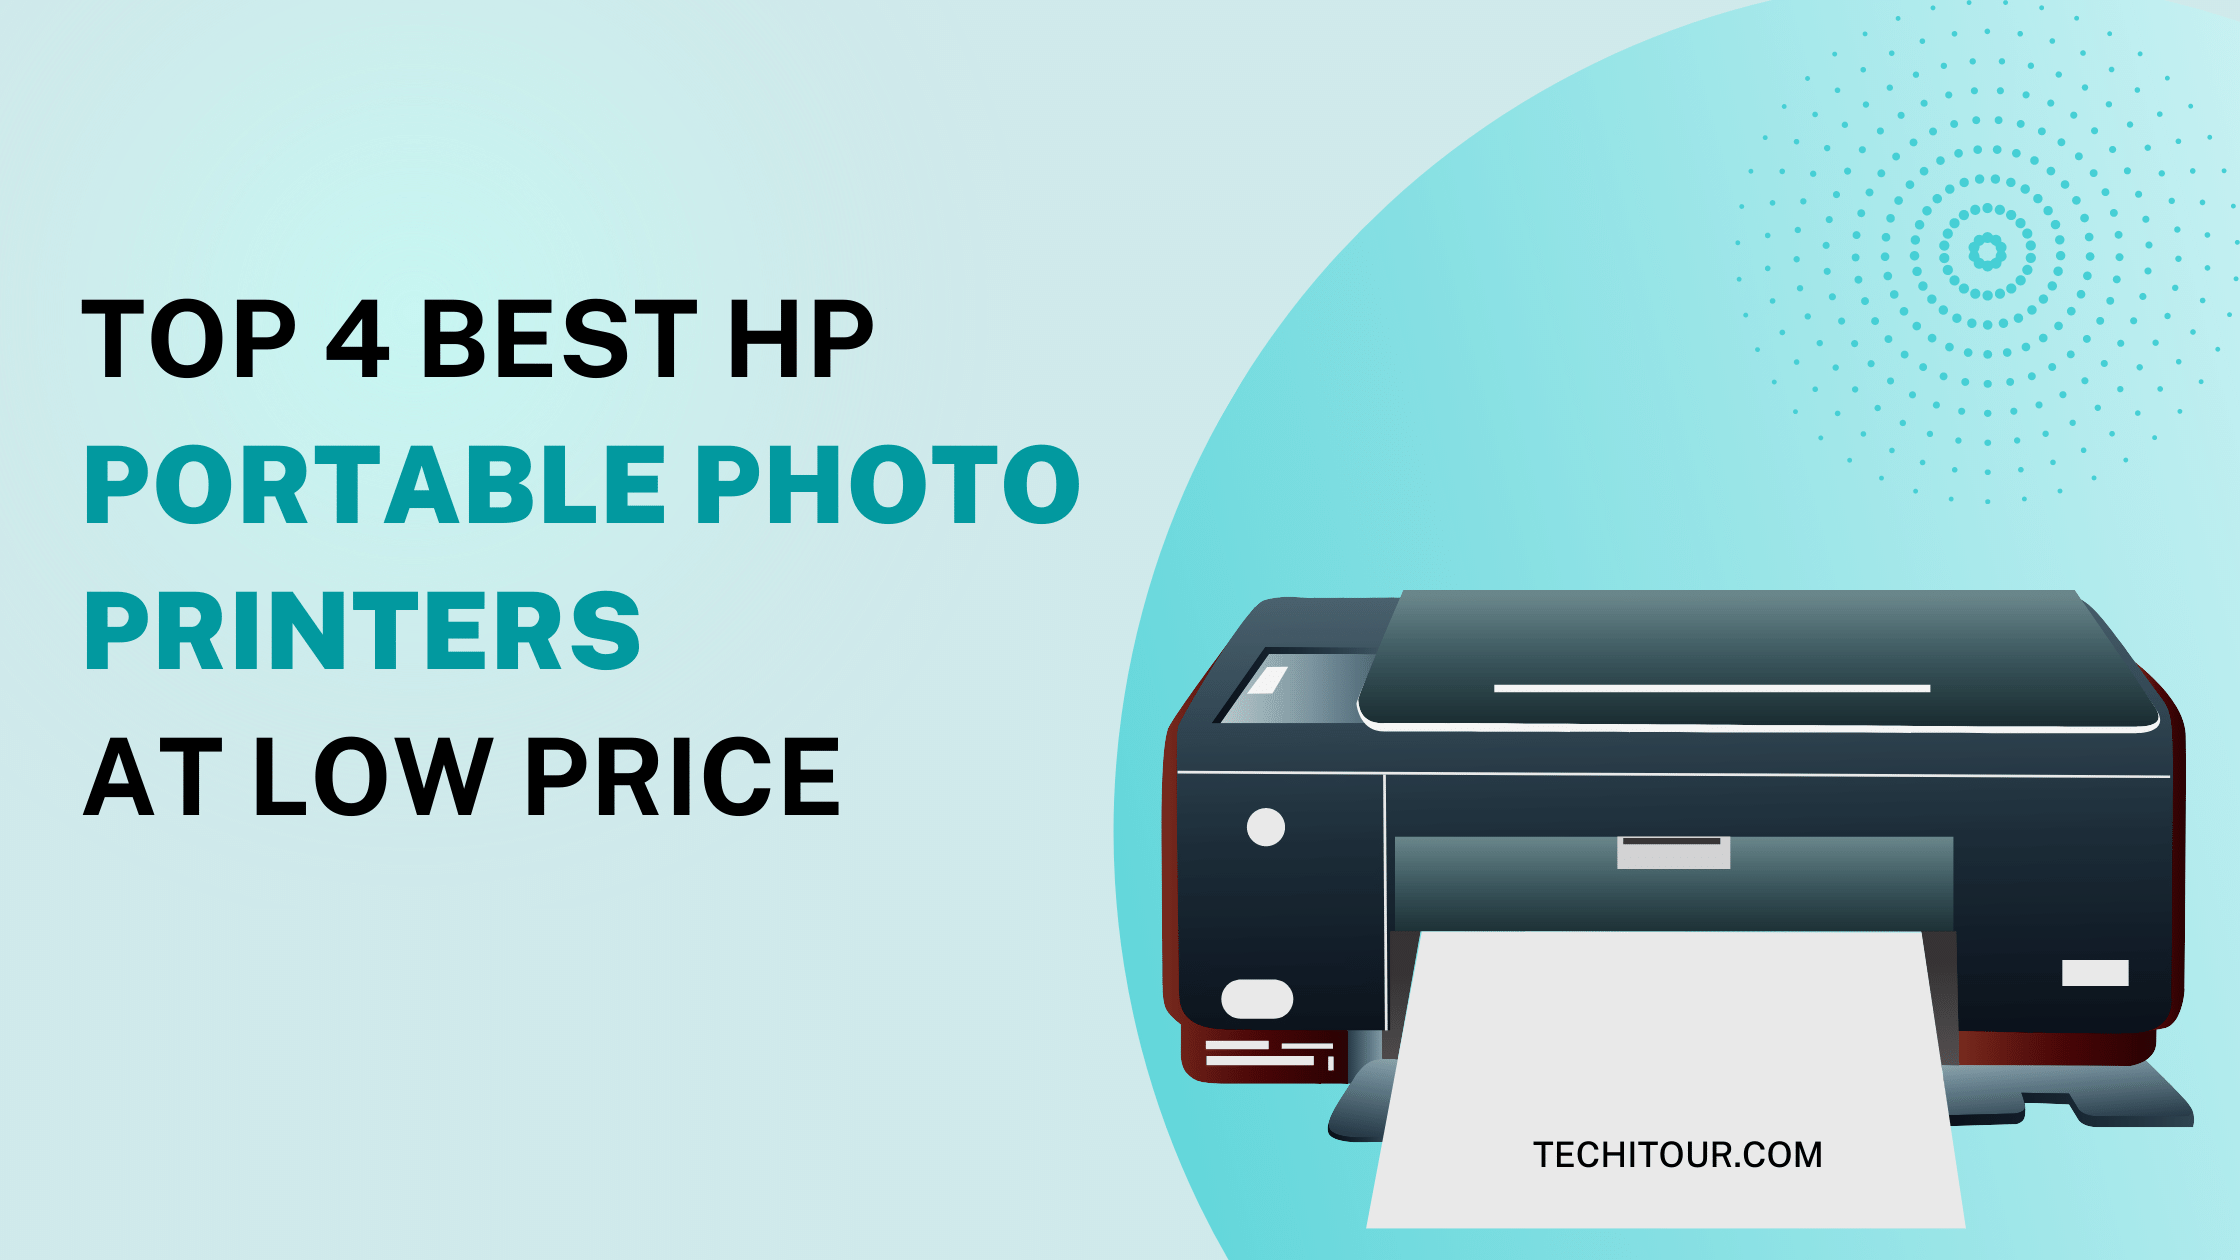 Top 4 Best HP Portable Photo Printers At Low Price